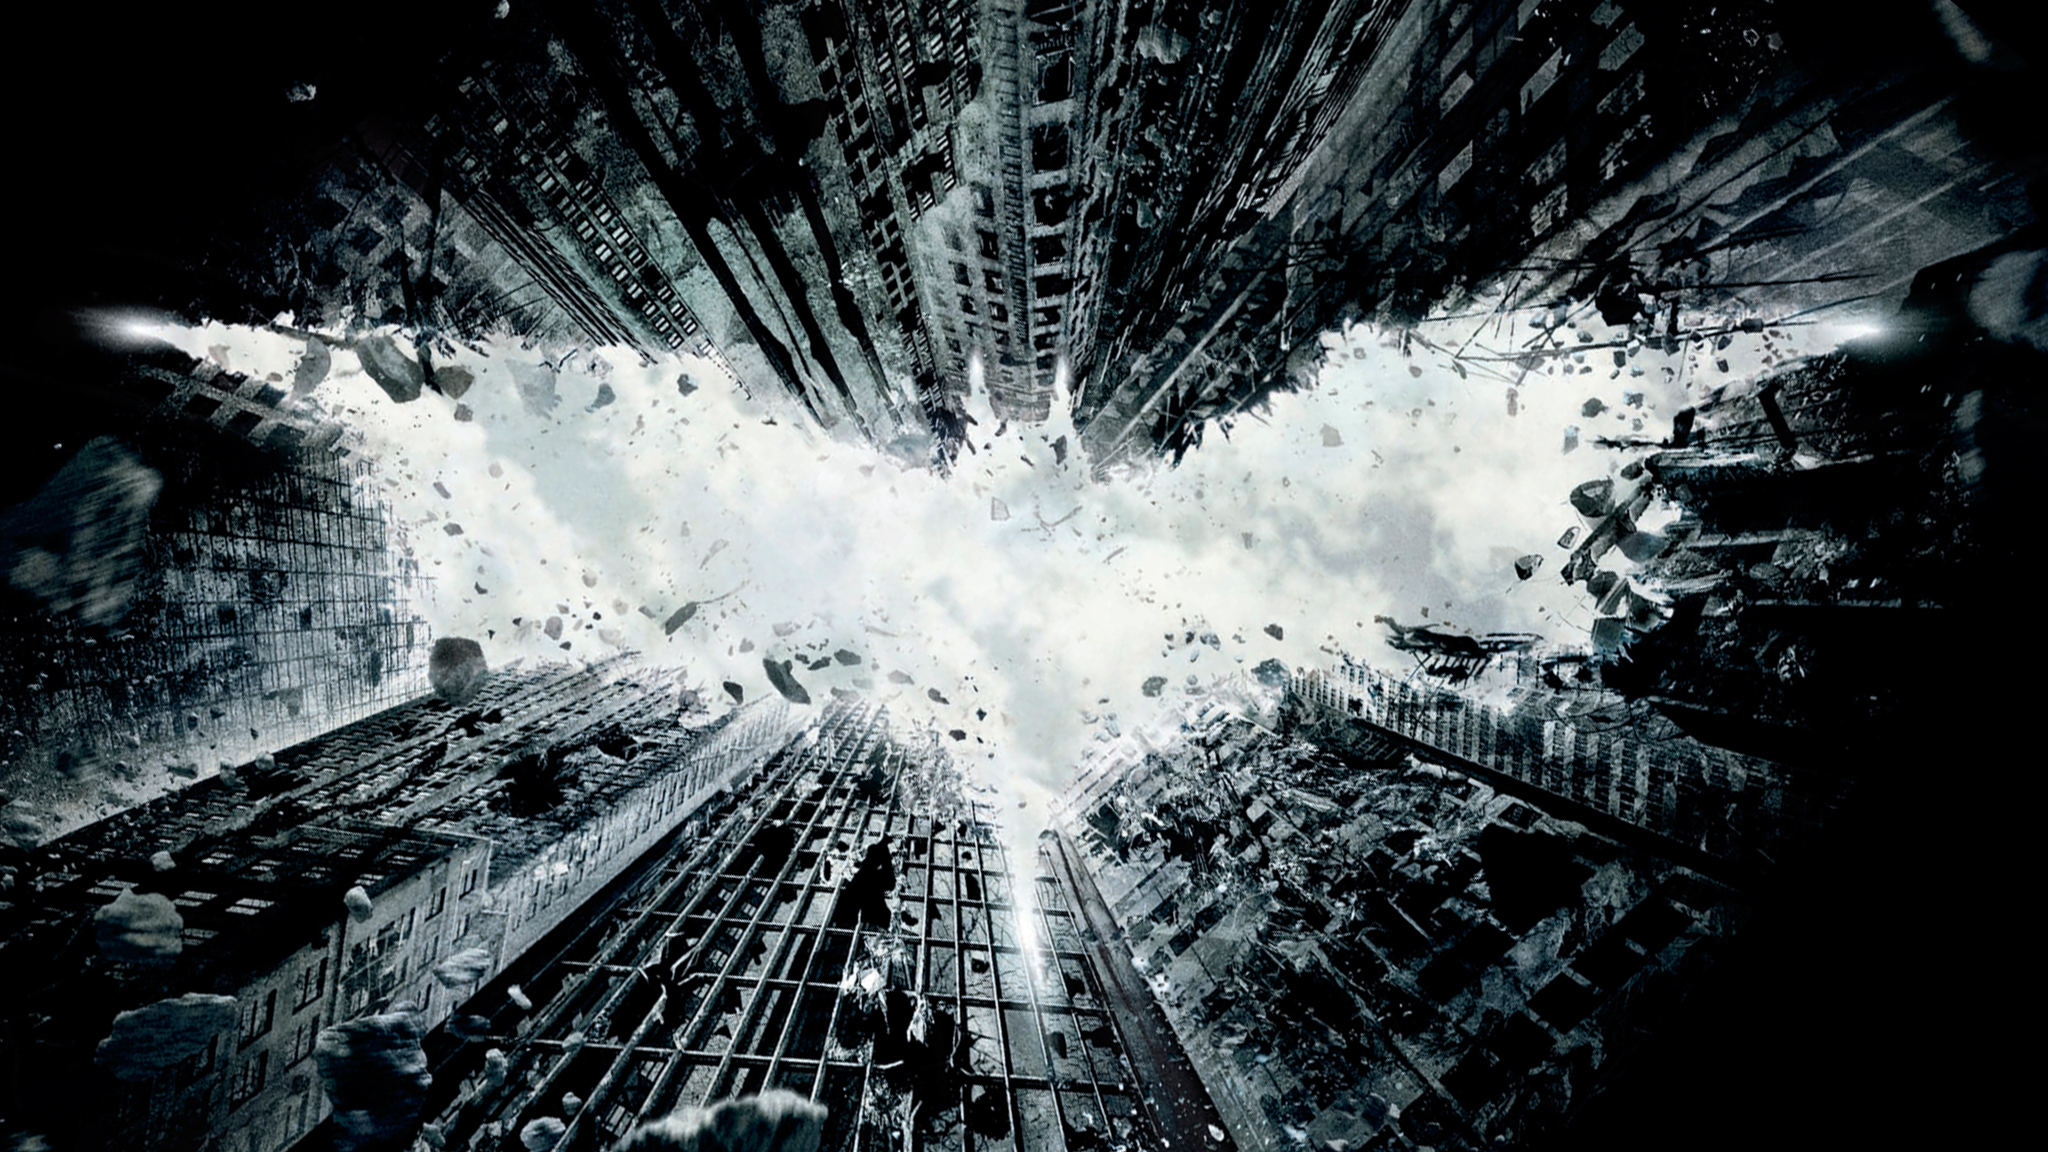  The Dark Knight Rises HD Wallpapers Backgrounds